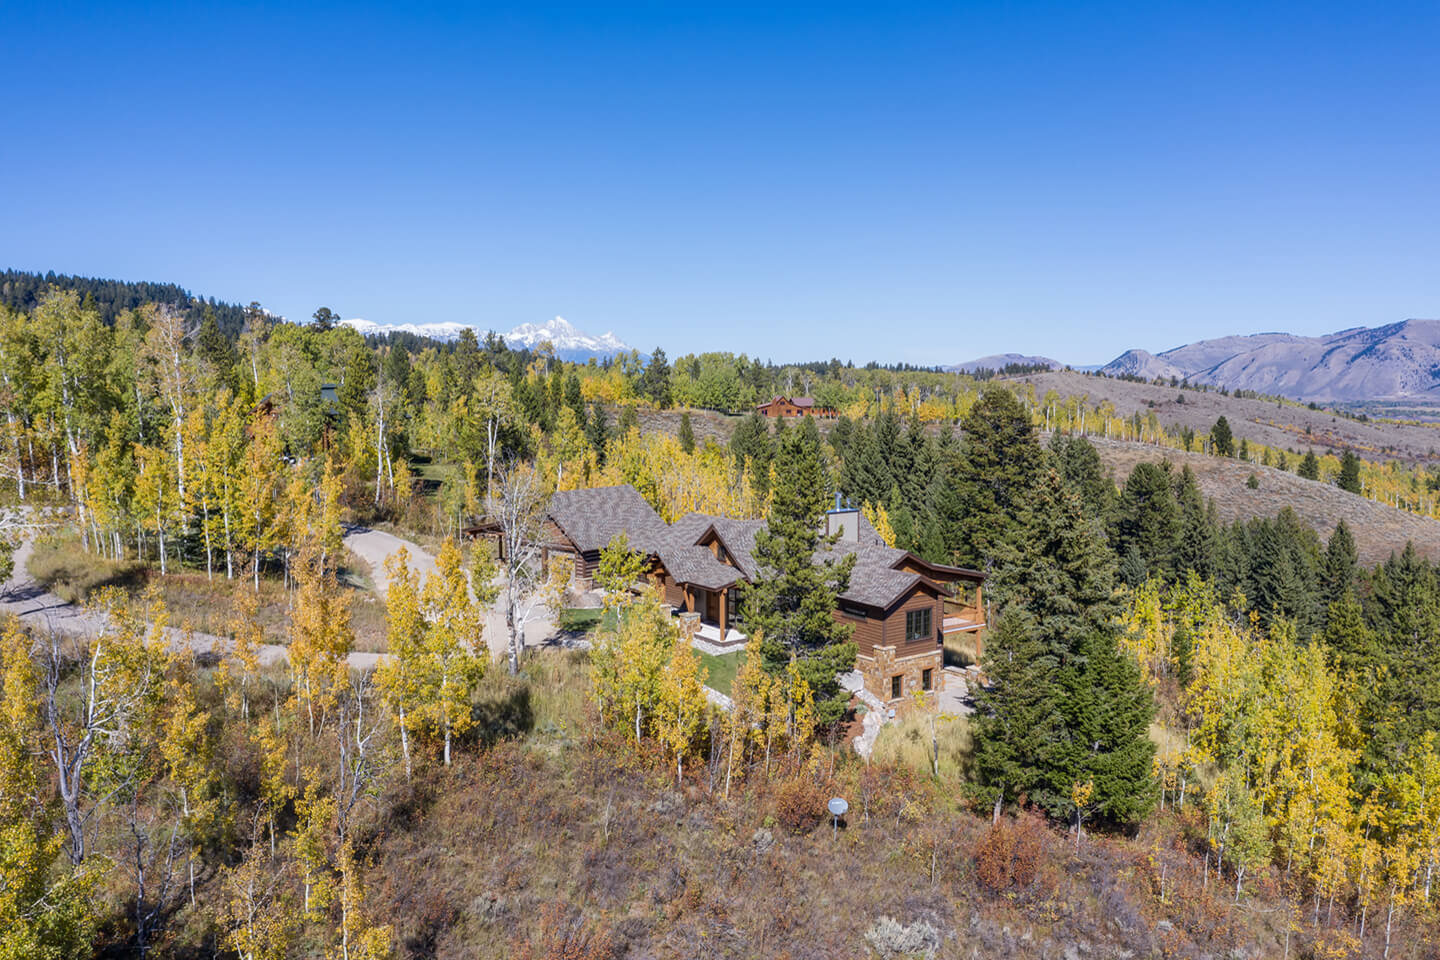 Residence seen from above with view to the Grand Teton